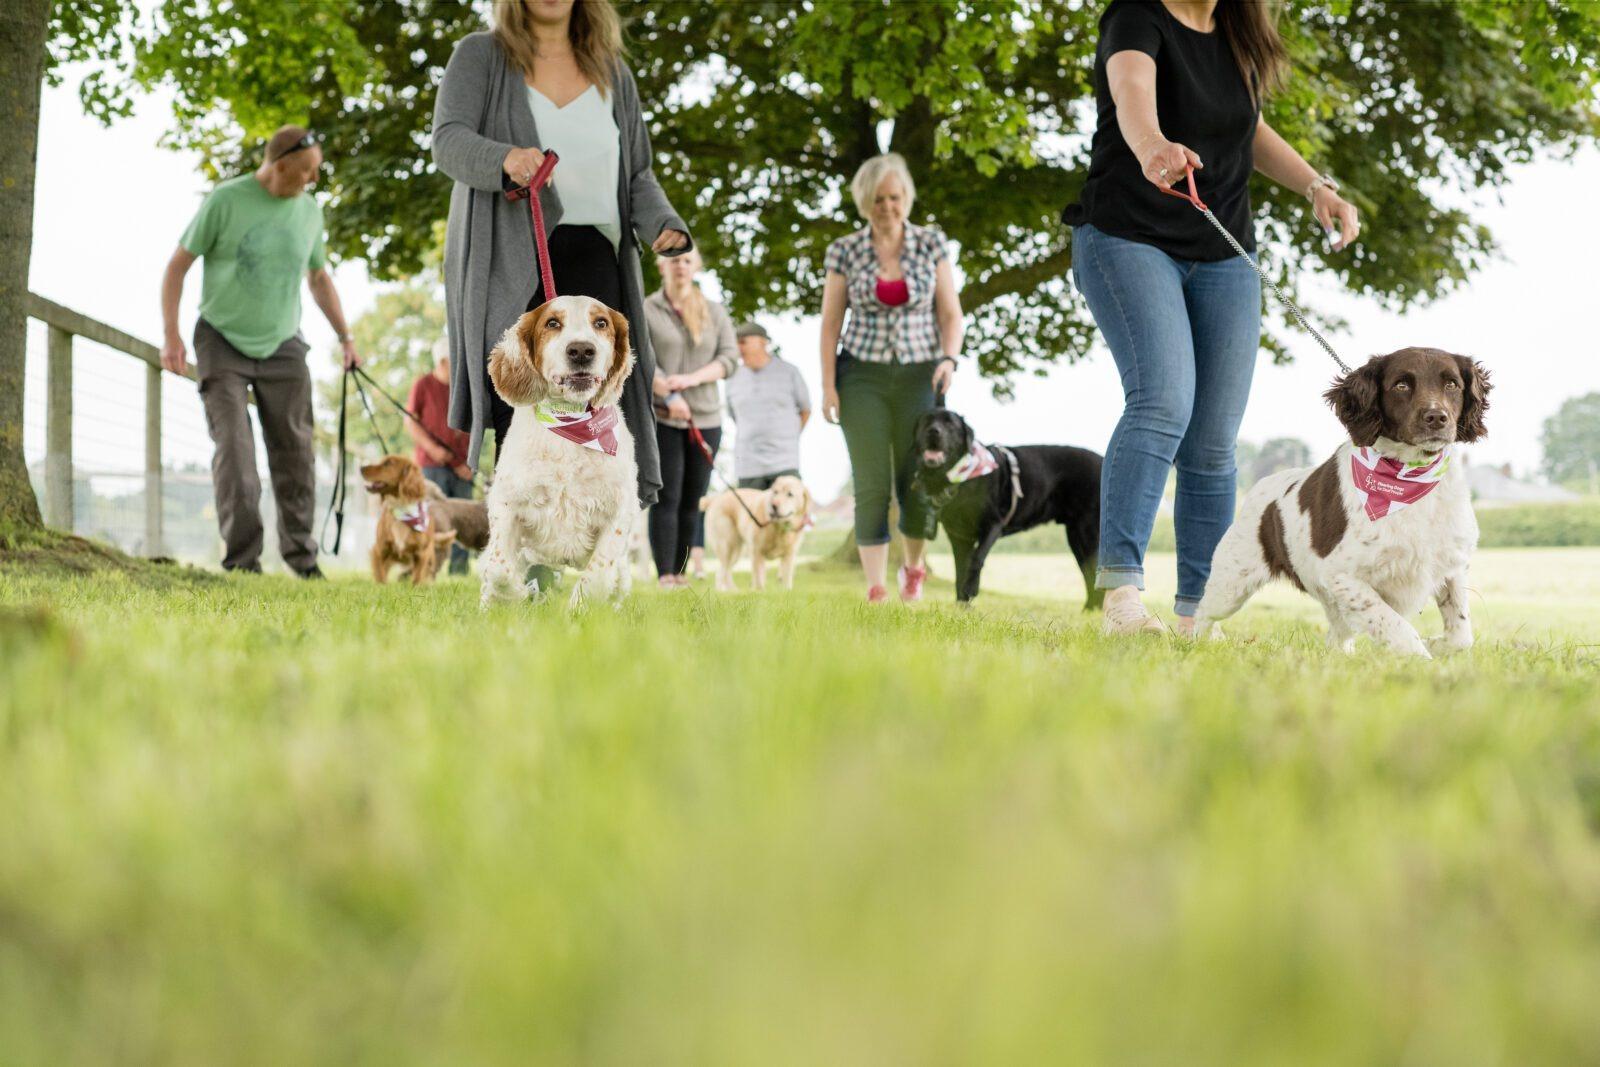 Hundreds of dog walkers gather at Askham Bryan College for the Great British Dog Walk